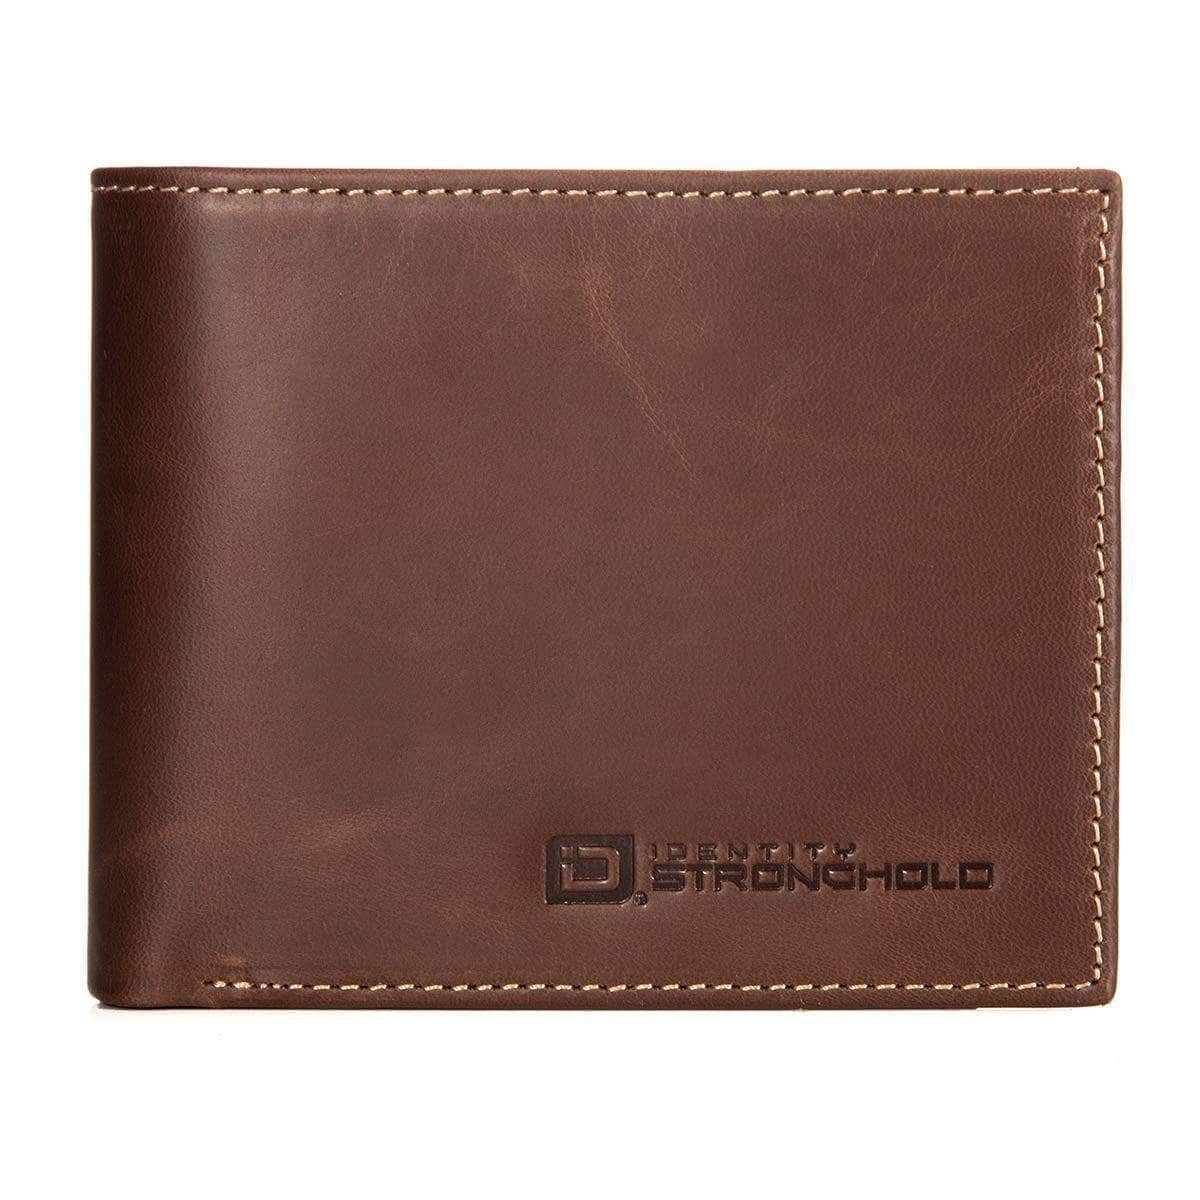 Luxury High Quality Wallet Mens Soft Leather Bifold ID Credit Card